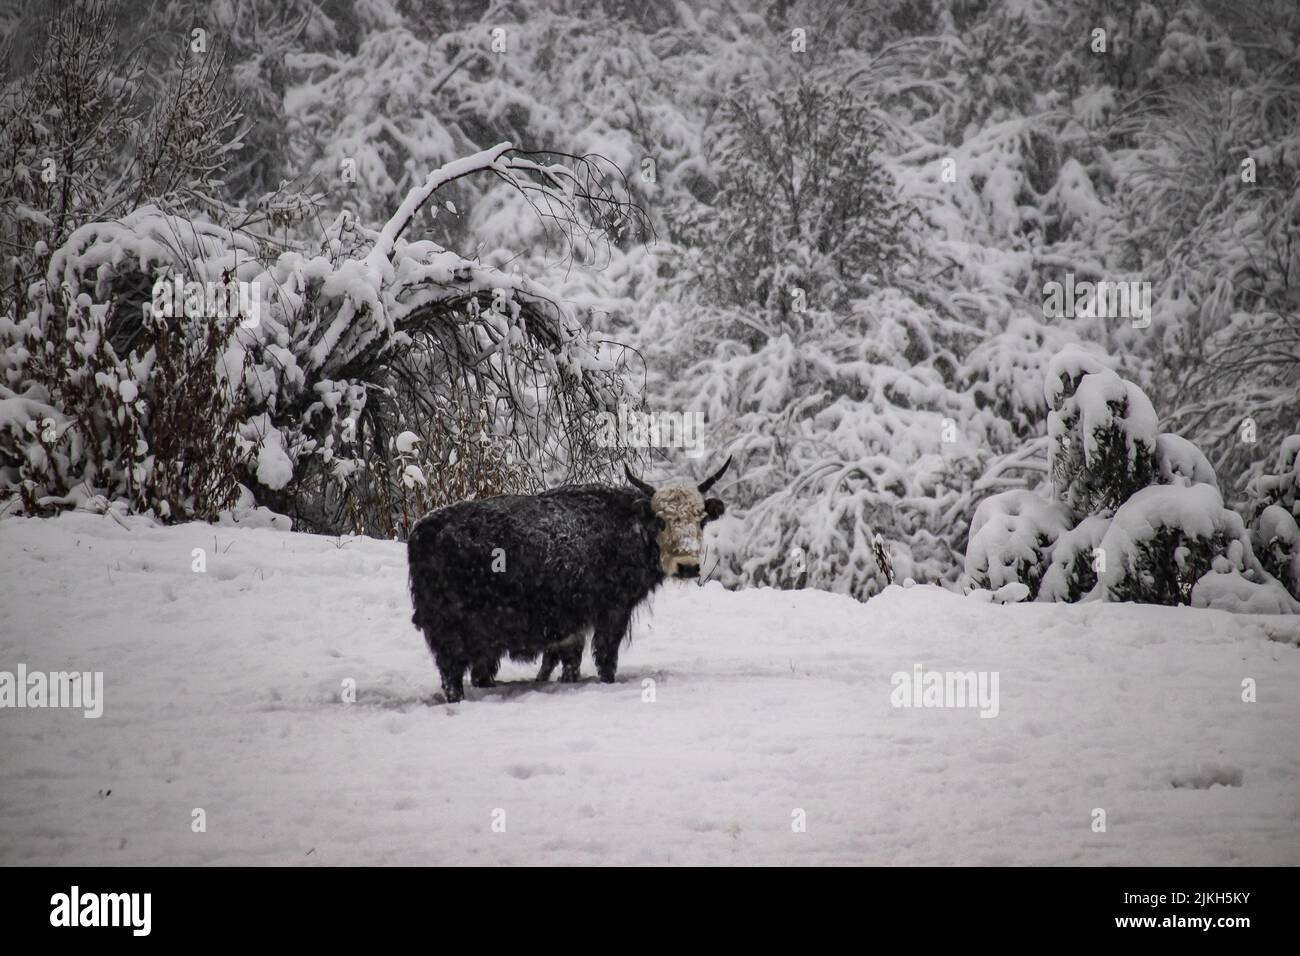 A black Domestic yak on a snowy land with heavy snow covered trees Stock Photo